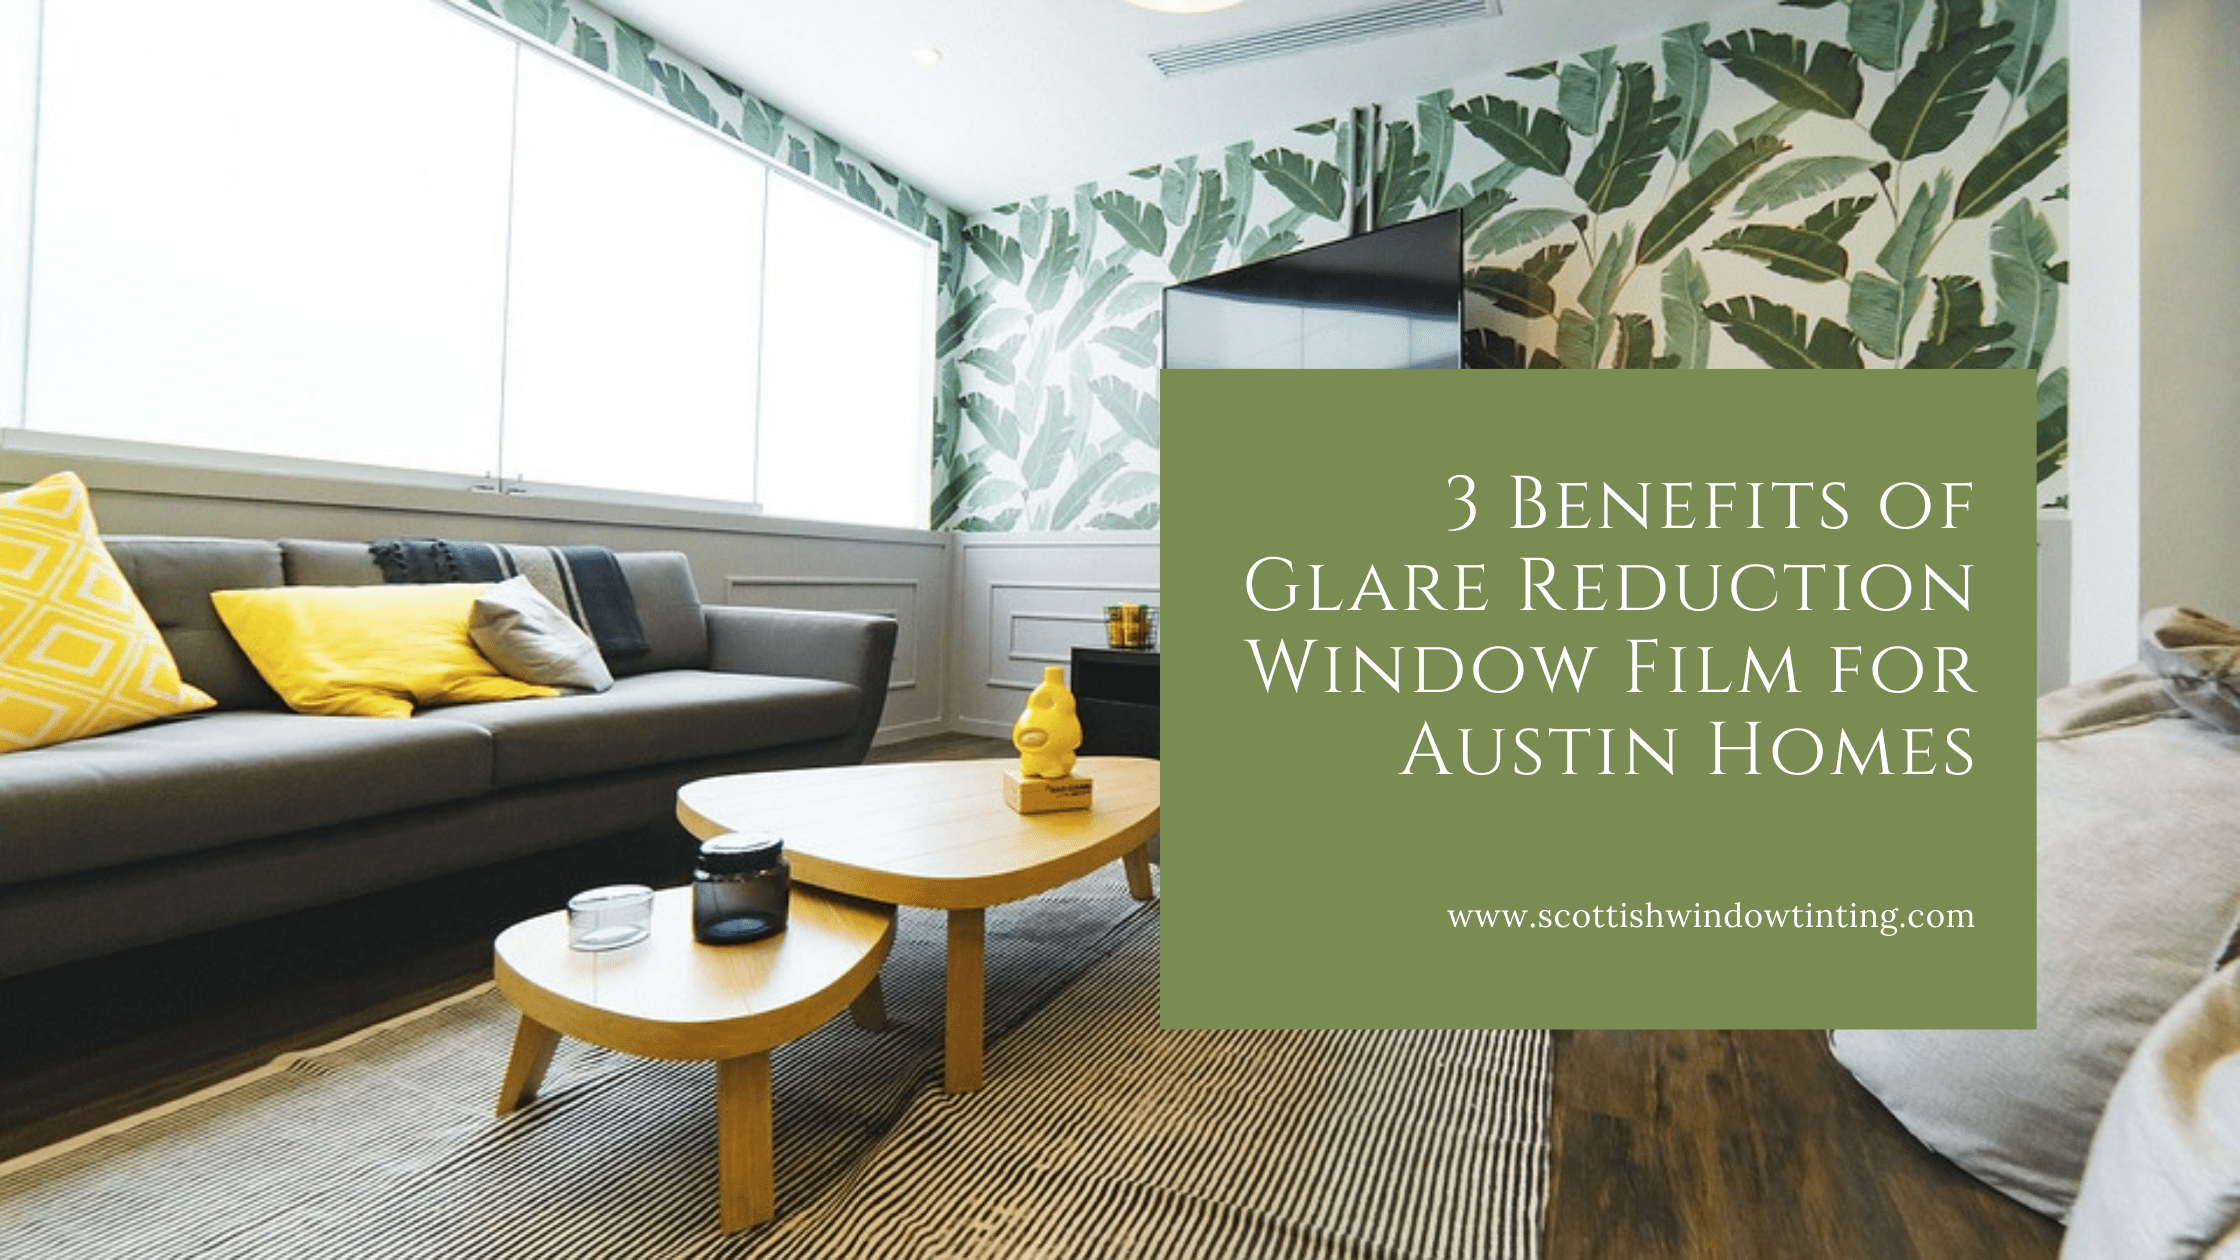 3 Benefits of Glare Reduction Window Film for Austin Homes